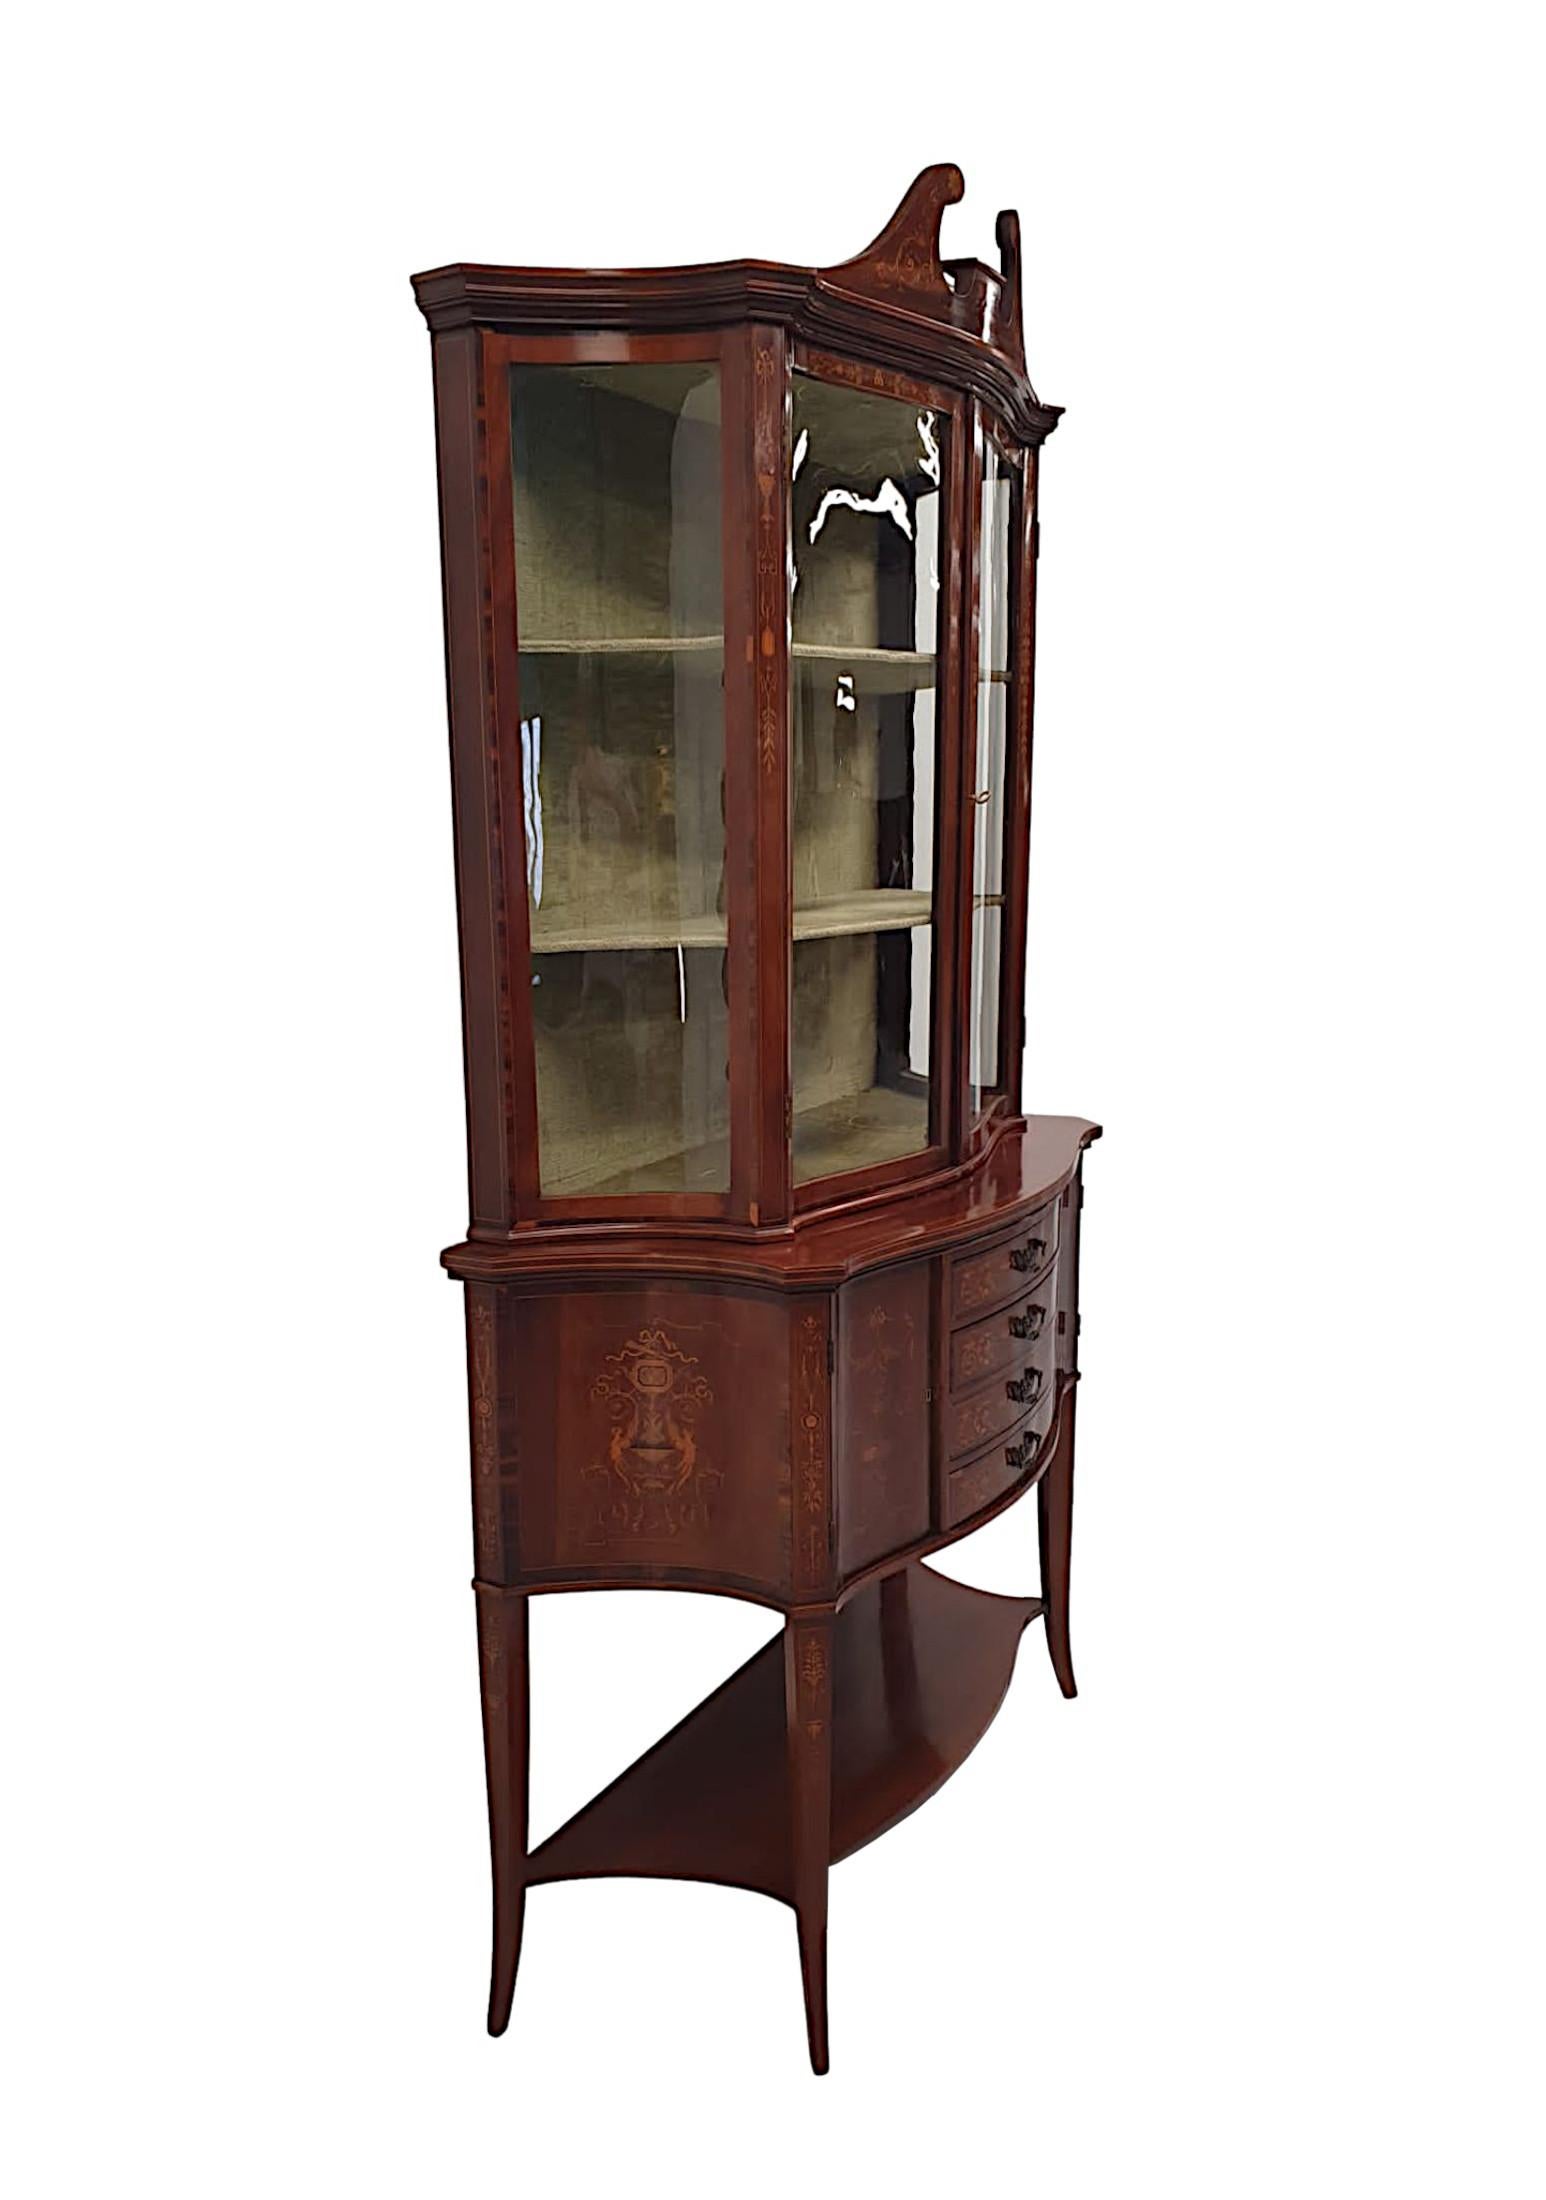 European Exceptional Edwardian Display Case Attributed to Edward and Roberts For Sale